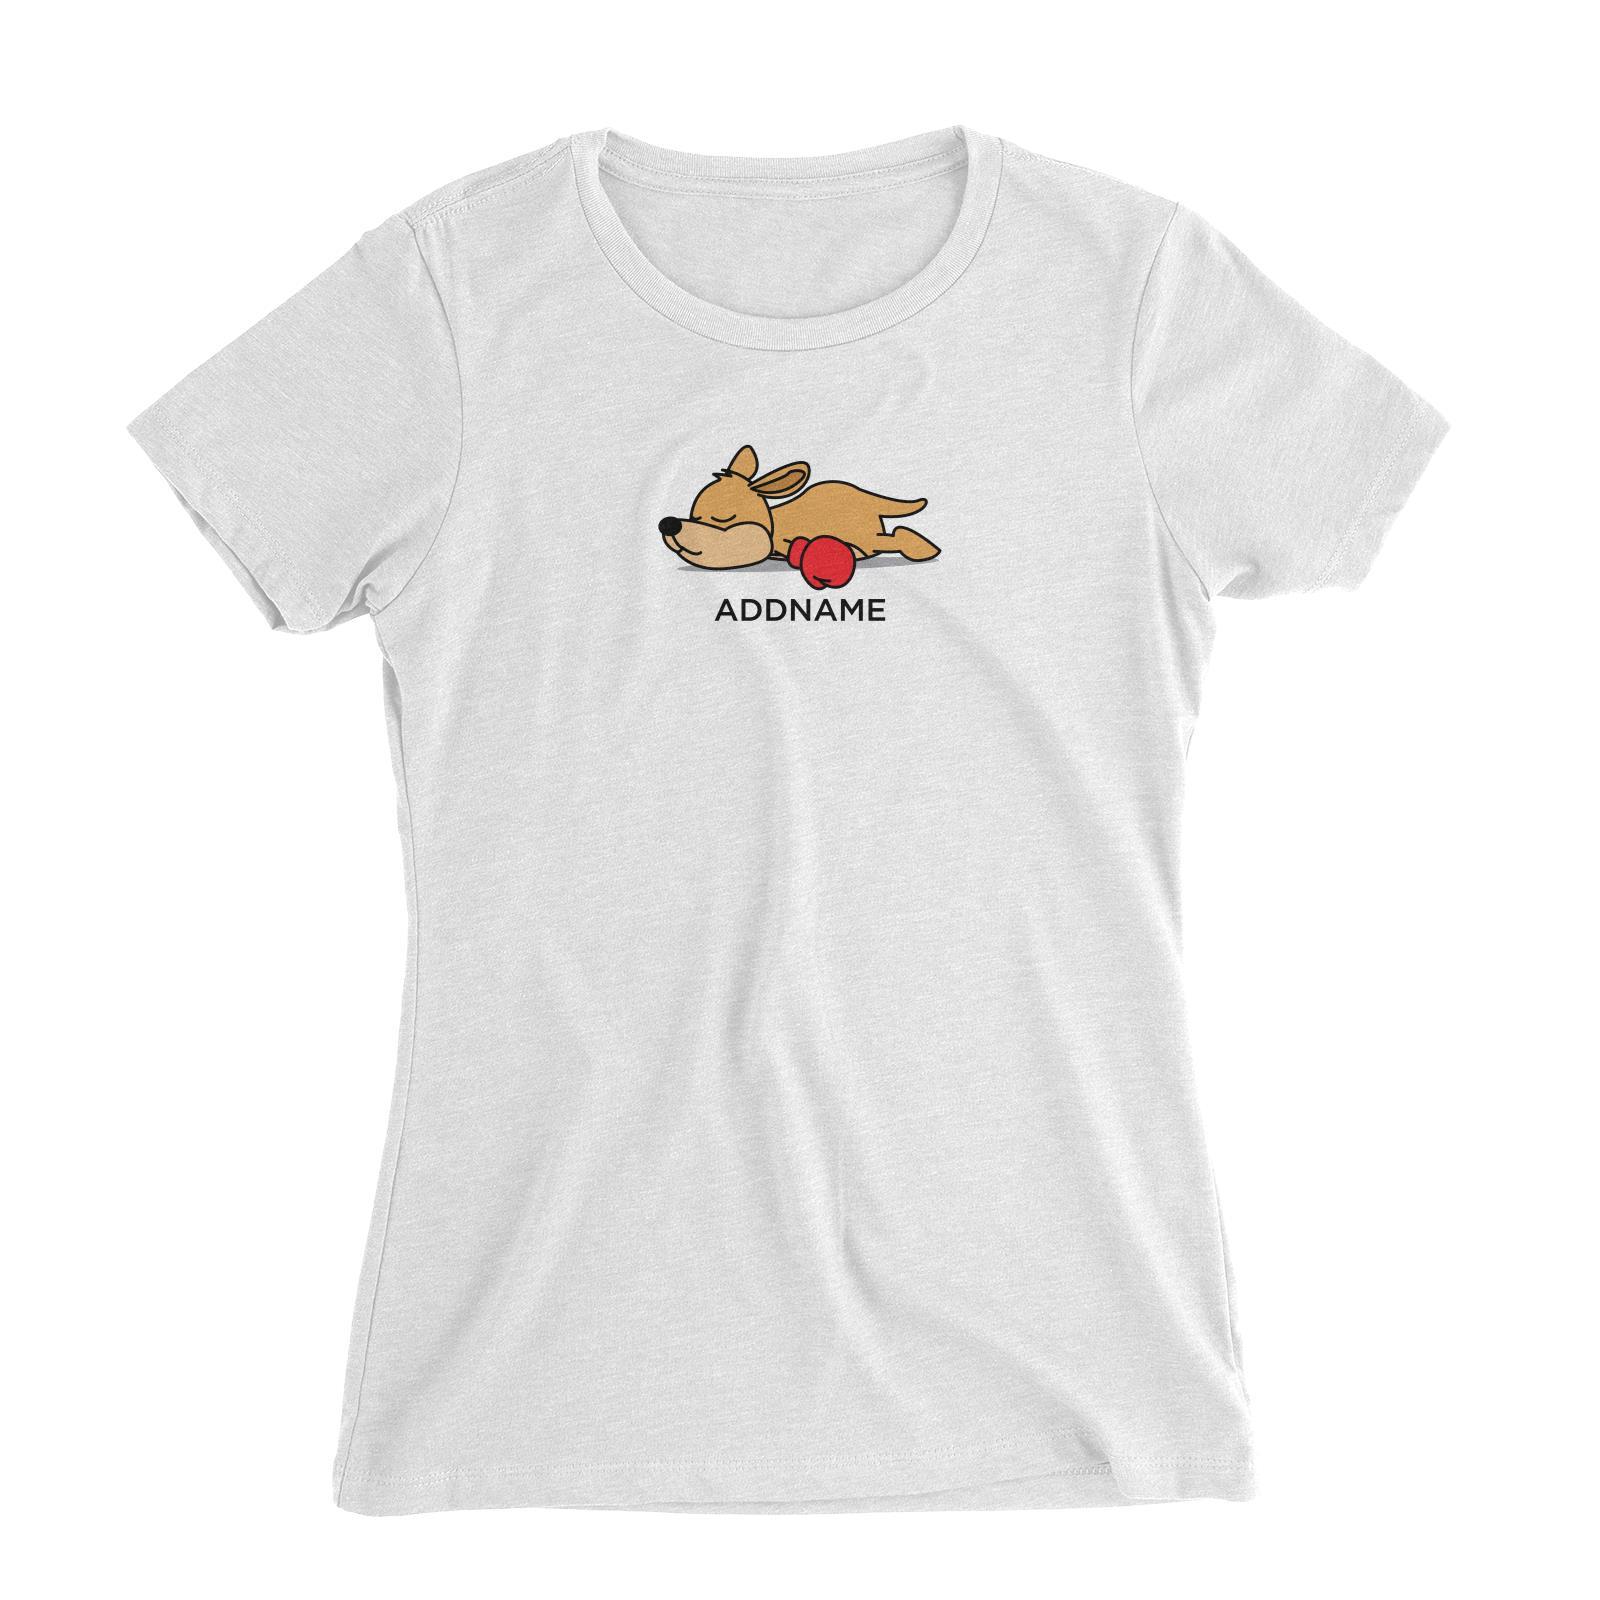 Lazy Kangaroo with Boxing Glove Addname Women's Slim Fit T-Shirt